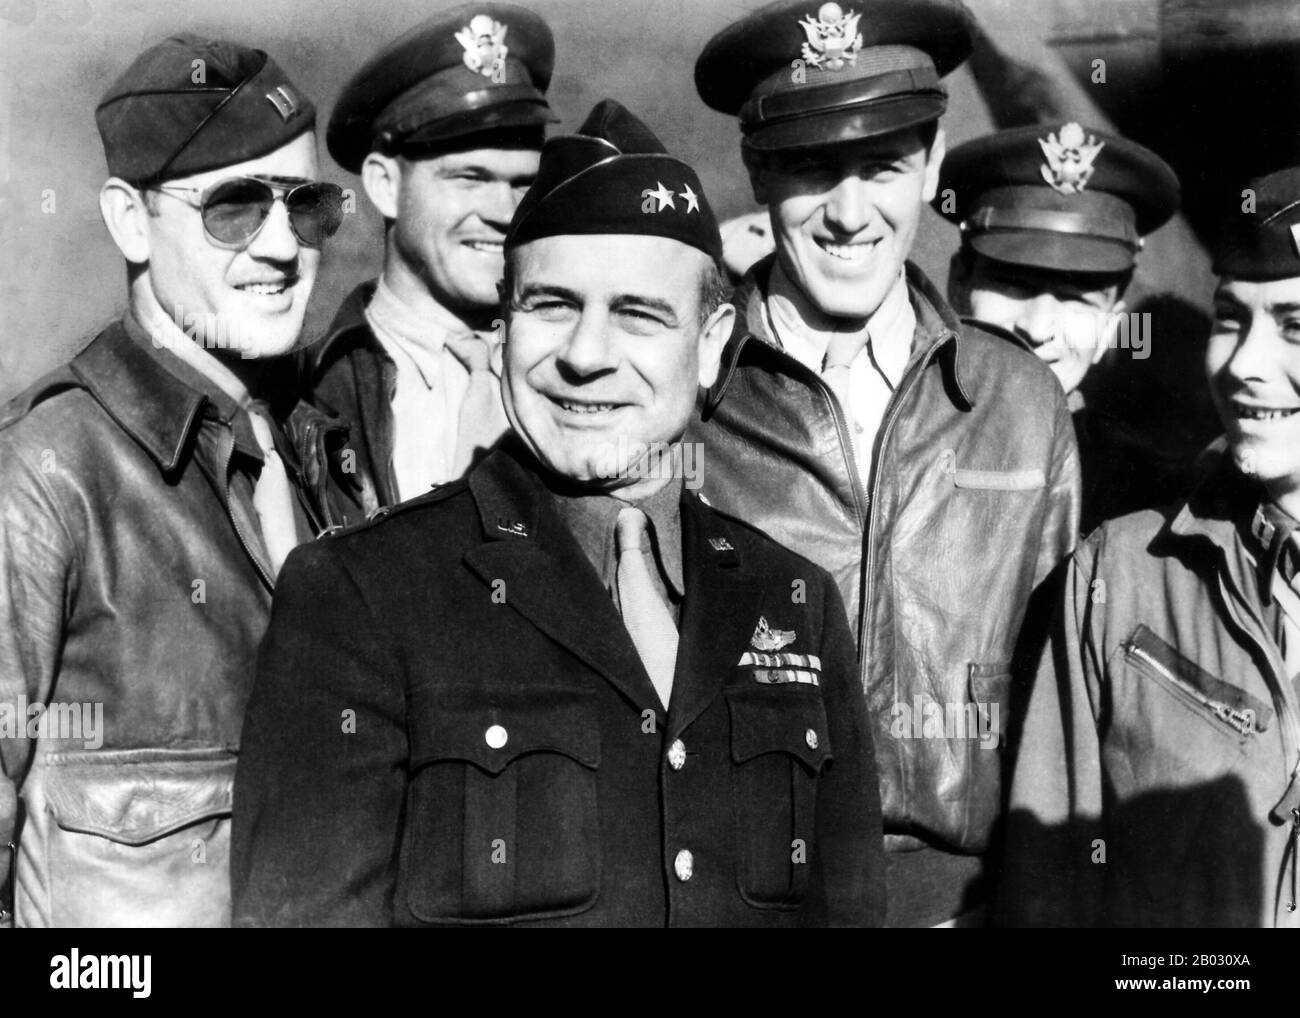 James Harold 'Jimmy' Doolittle (December 14, 1896 – September 27, 1993) was an American aviation pioneer. Doolittle served as a commissioned officer in the United States Army Air Forces during the Second World War and was awarded the Medal of Honor for his valor and leadership as commander of the Doolittle Raid against Japan.  The Doolittle Raid, also known as the Tokyo Raid, on 18 April 1942, was an air raid by the United States on the Japanese capital Tokyo and other places on Honshu island during World War II, the first air raid to strike the Japanese Home Islands. It demonstrated that Japa Stock Photo